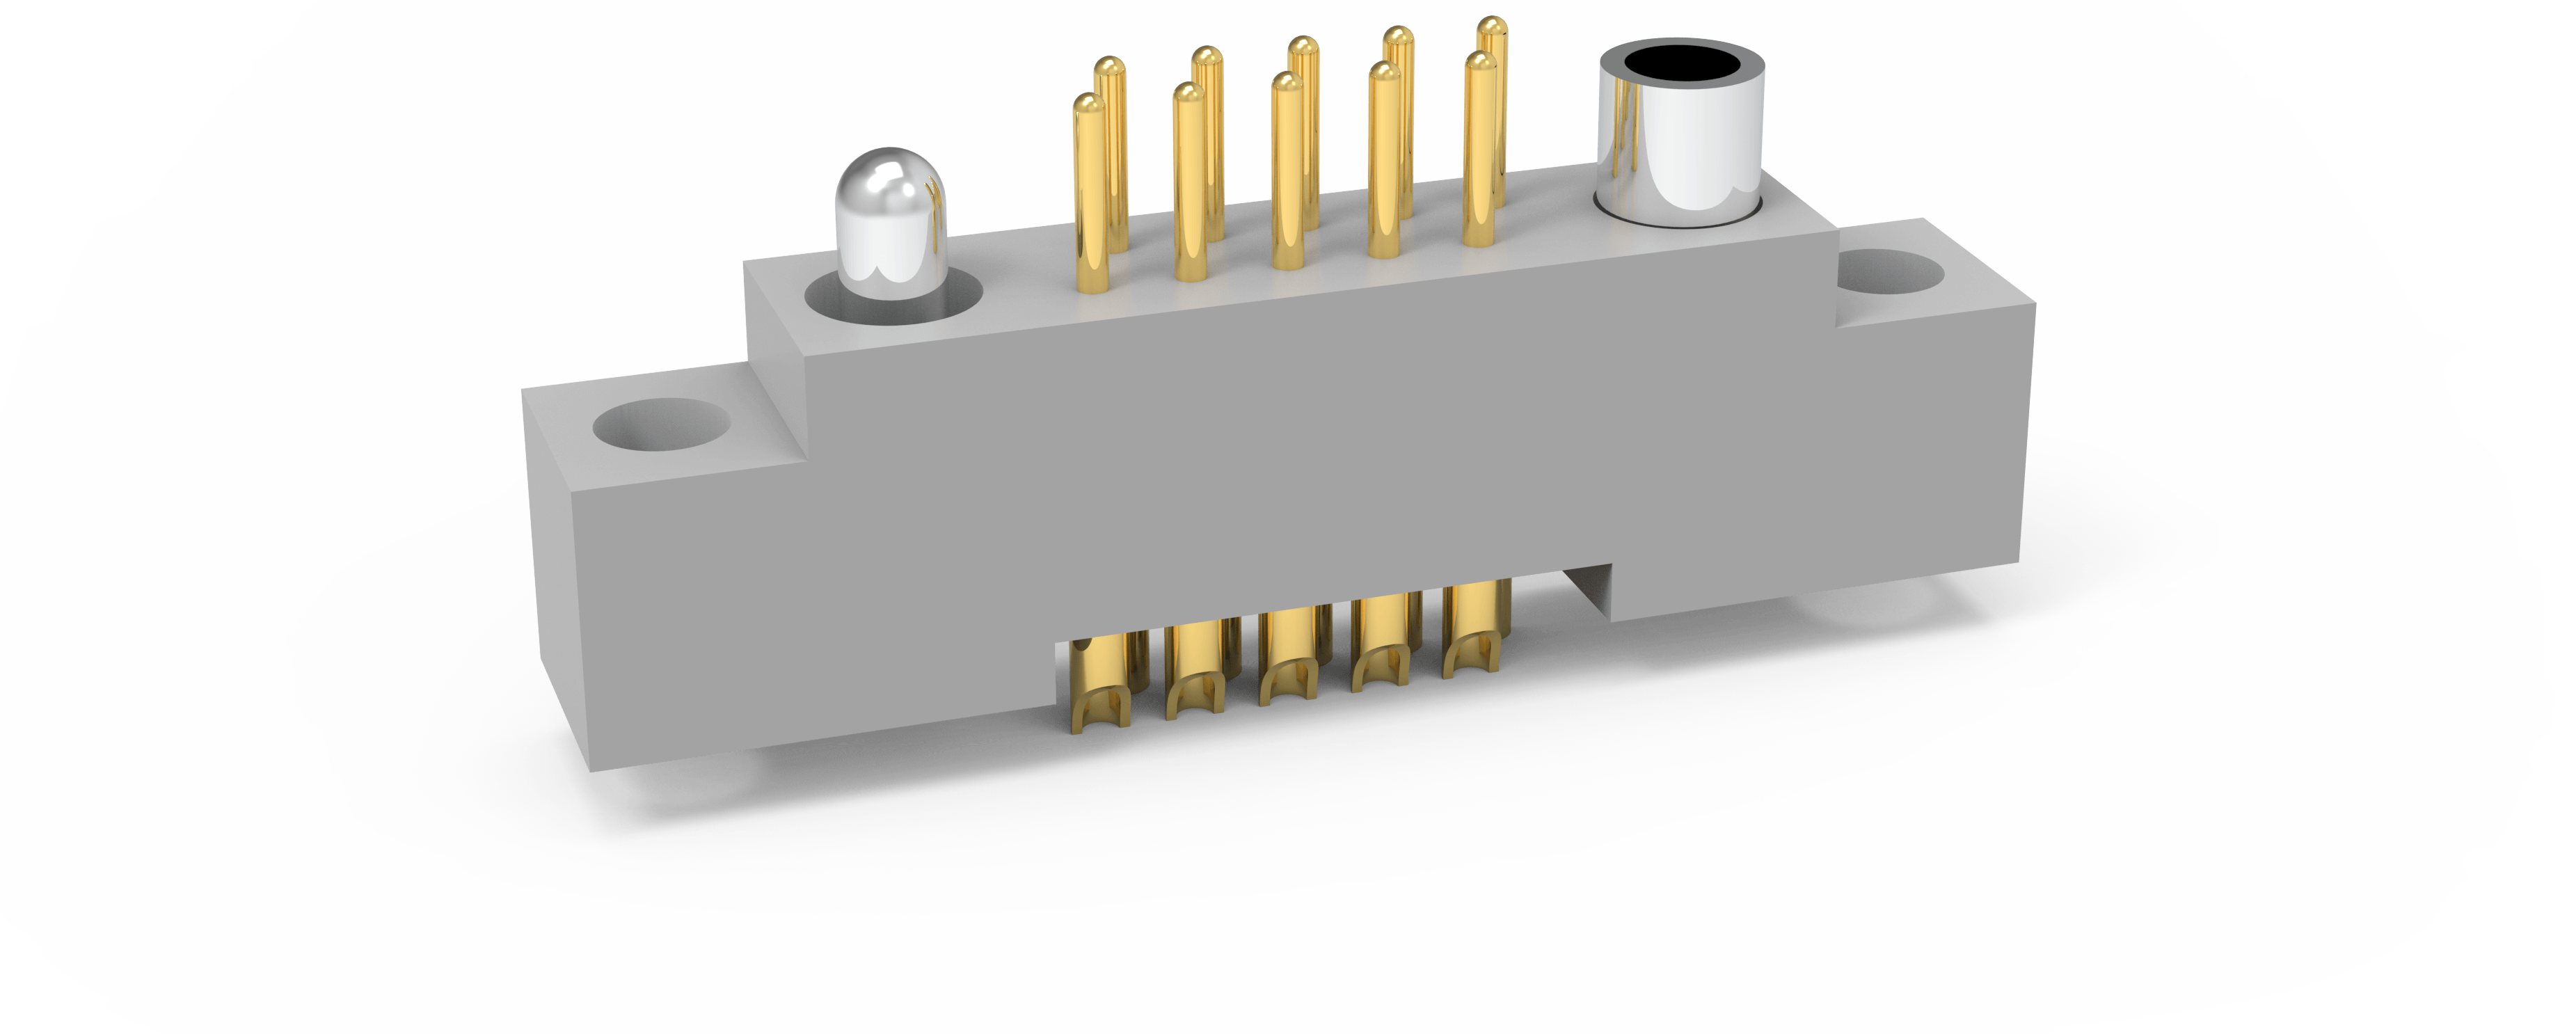 New Press-Fit PCB Pins for Plated-Through Holes